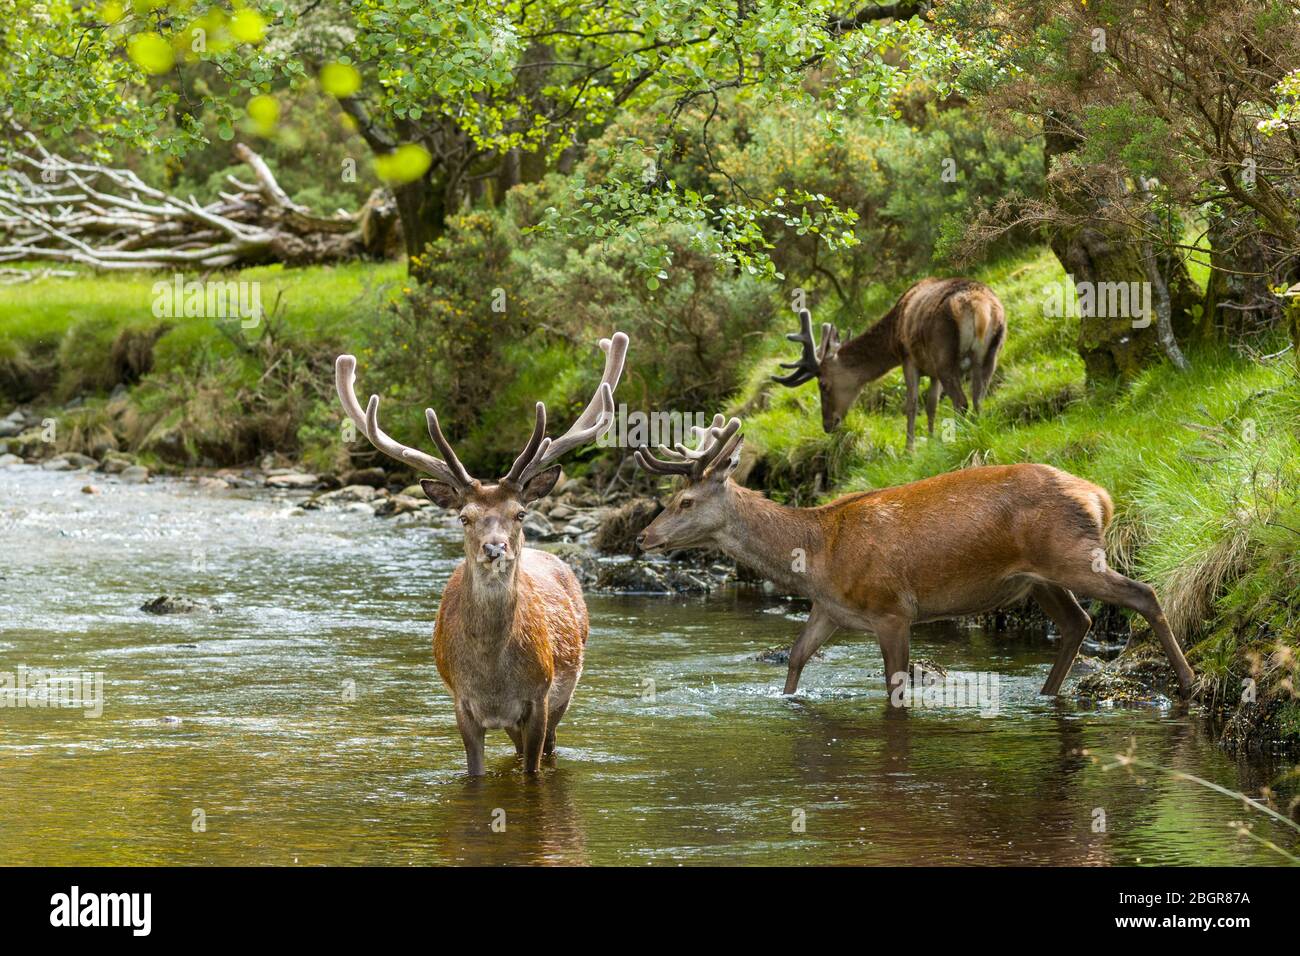 Red Deer stags, Cervus elaphus, with large antlers beside young male in river scene at Lochranza, Isle of Arran, Scotland Stock Photo